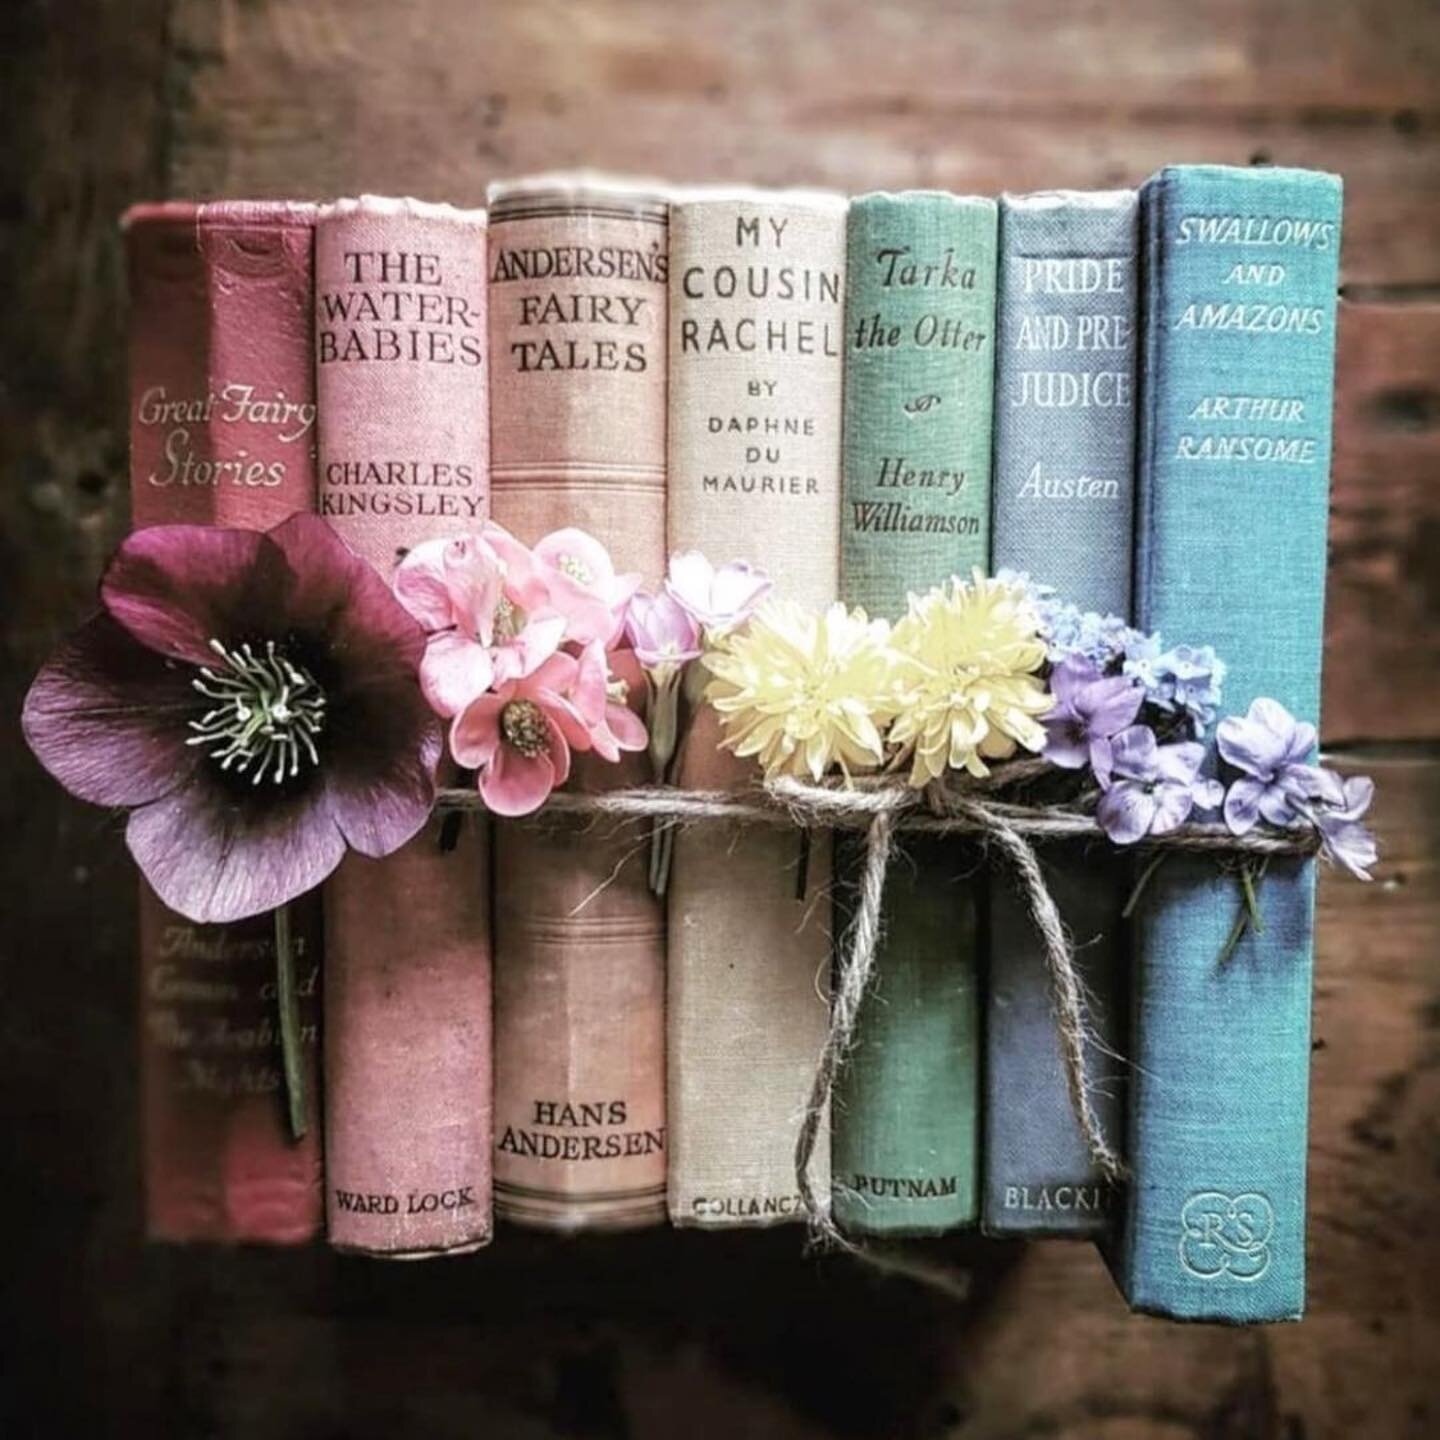 I love this colorful arrangement of old books! This photo was an inspiration for my spring collection. The colors of the linen covers are so soft and beautiful. You will see these colors represented in rose blush quartz, pale  lavender amethyst, aqua